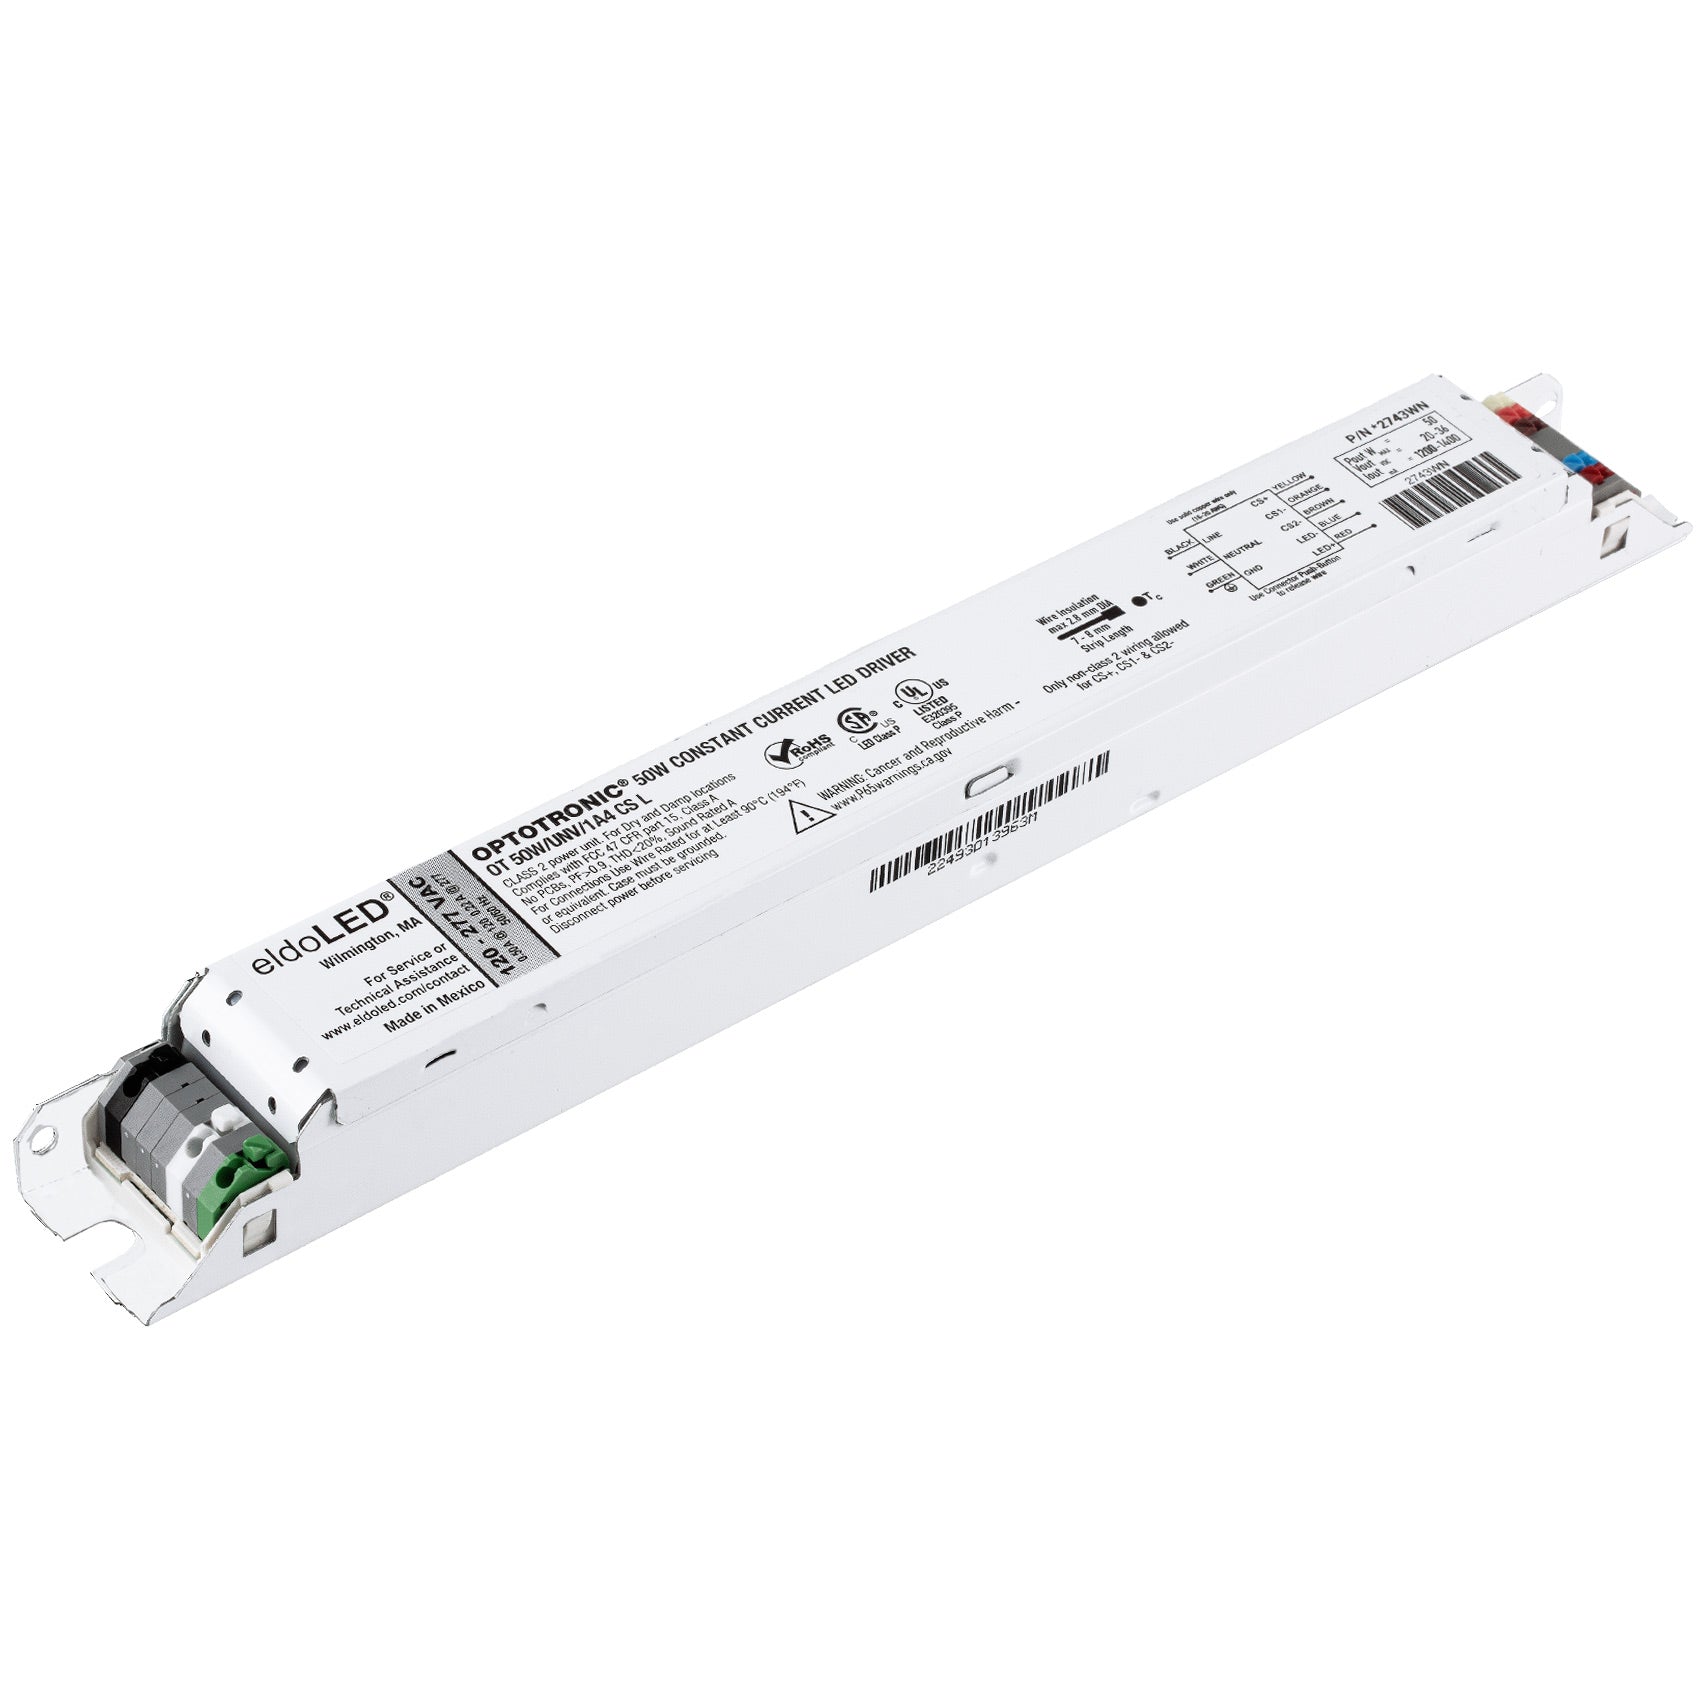 geluid beloning spontaan eldoLED *2743WN OPTOTRONIC 50W Constant Current Non-Dimmable LED Drive –  sirs-e.us